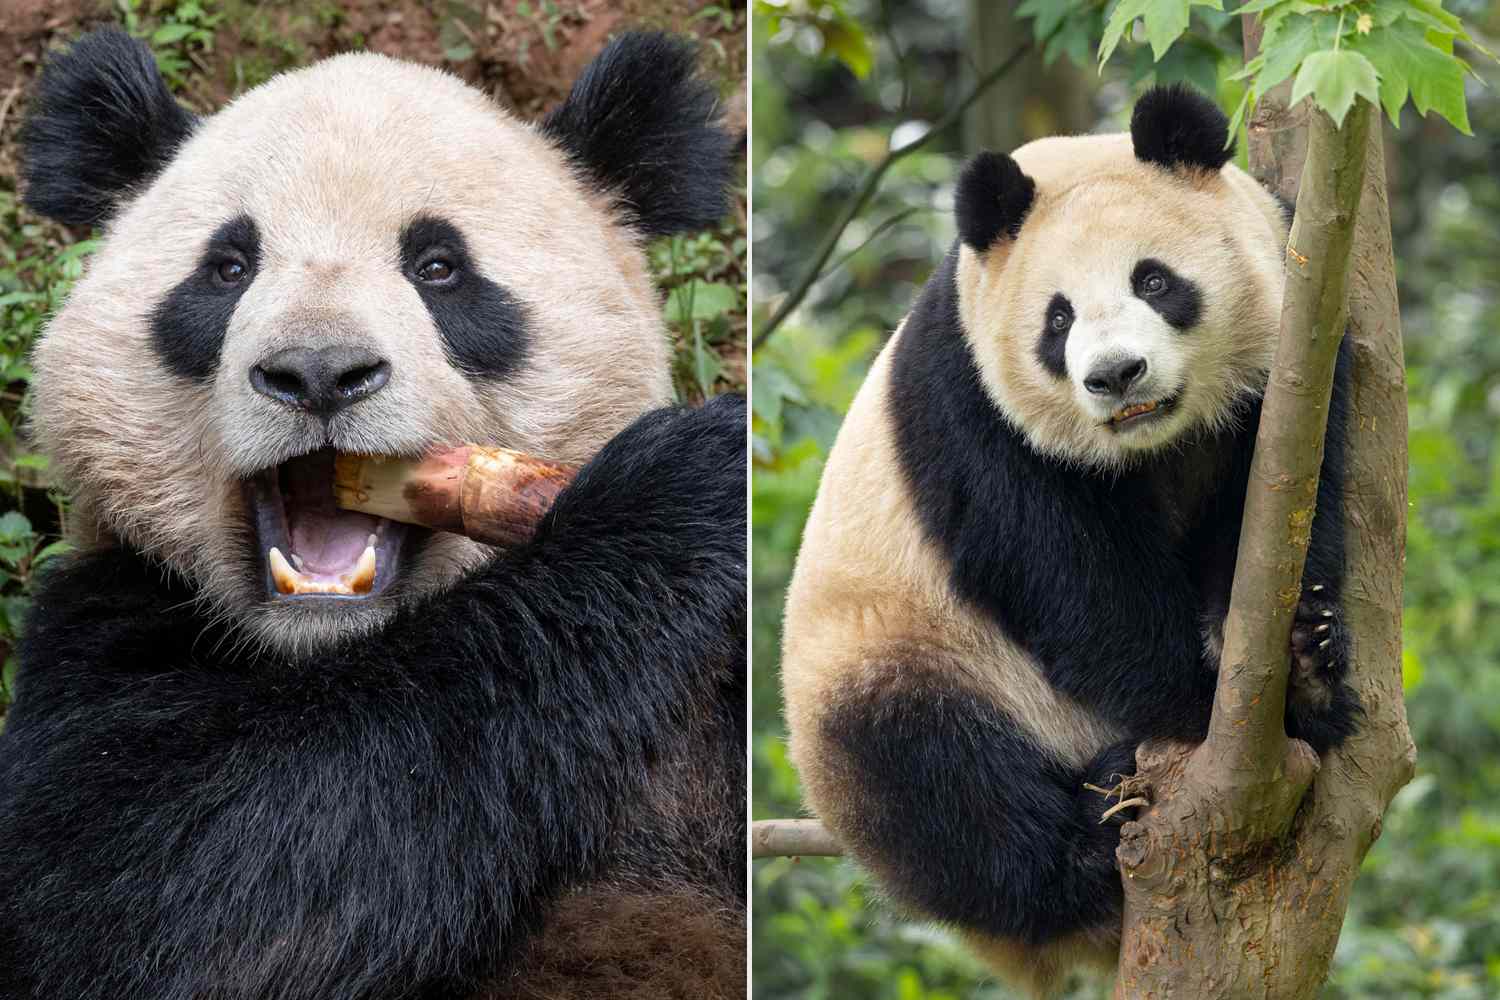 Pandas Are Returning to the San Diego Zoo! Meet the 'Gentle' Bears Moving to California